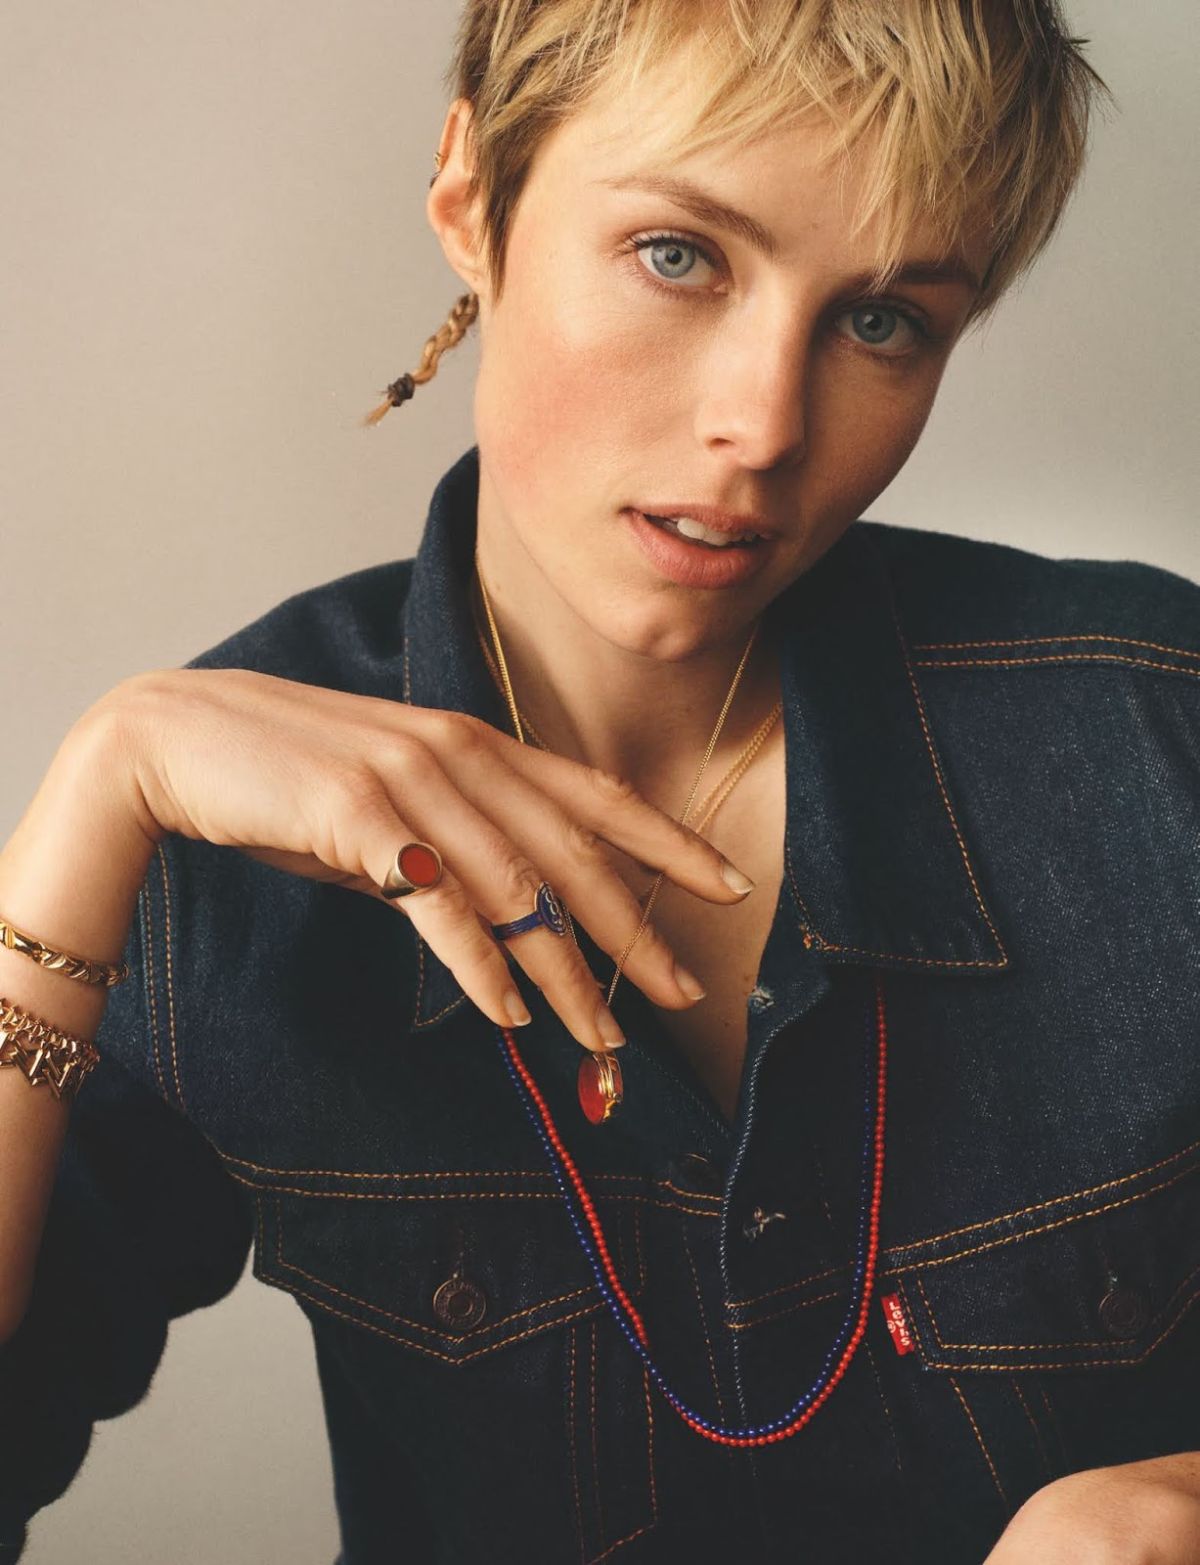 Clothing: Jacket, Jeans by Levi's / Jewelry by Ferian, Rosa de la Cruz, Louis Vuitton, Dior, Cartier, Rebus, Foundrae. Model: Edie Campbell. Stylist: Kate Phelan. Hair Stylist: Syd Hayes. Makeup Artist: Janeen Witherspoon